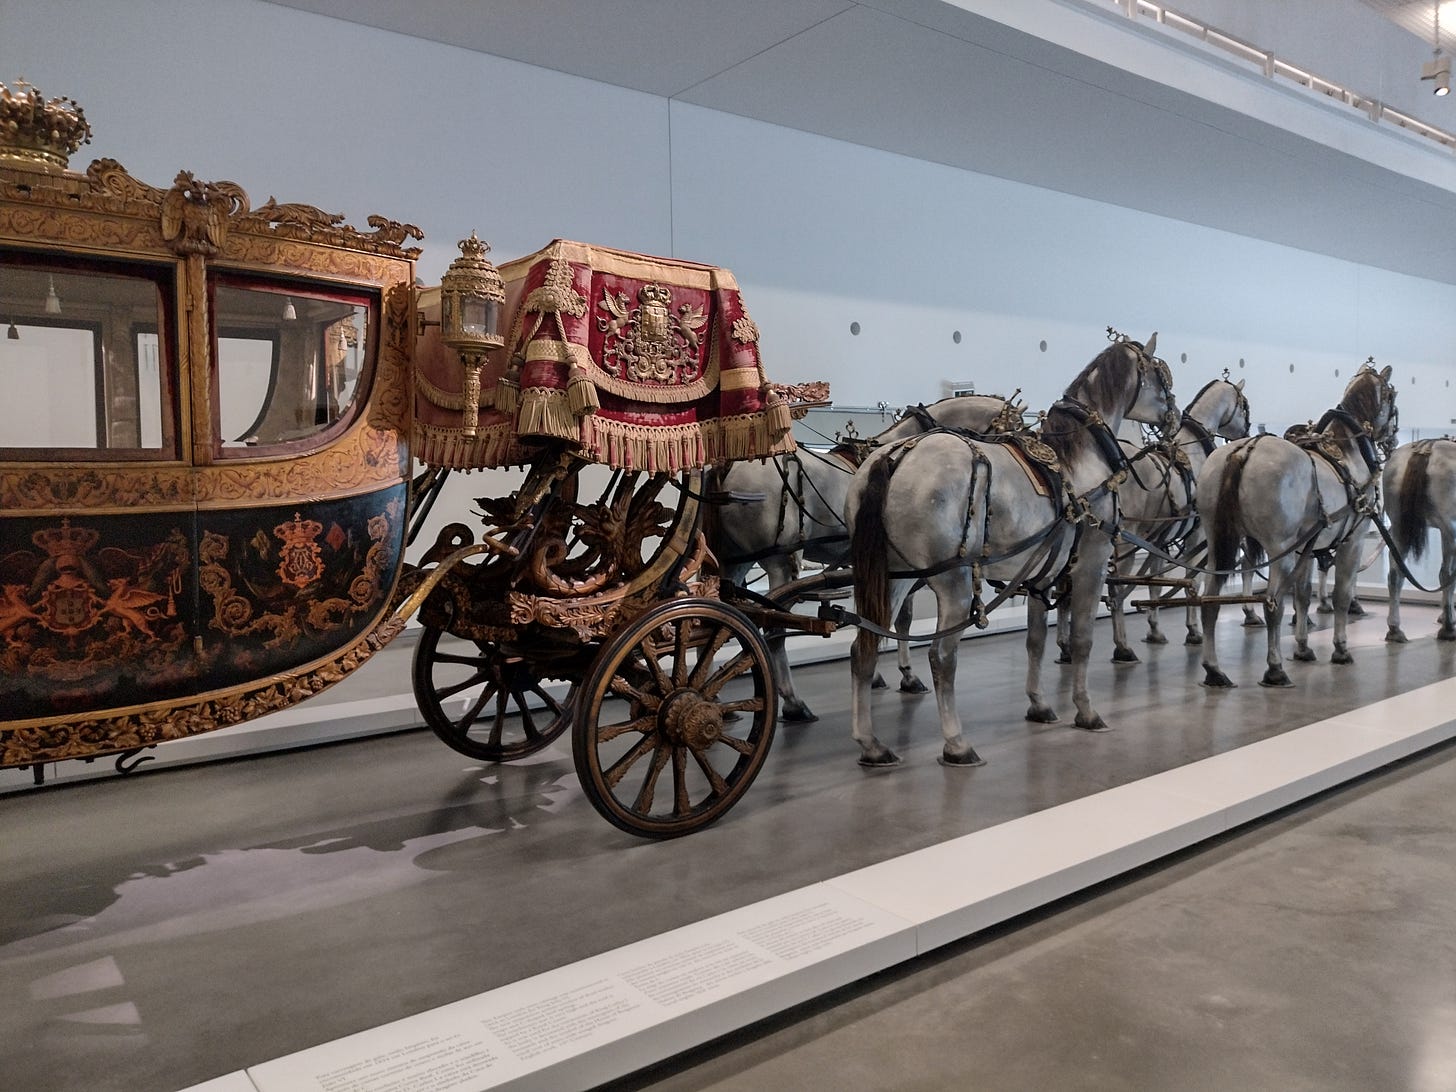 Image of the Crown State Carriage and horses.